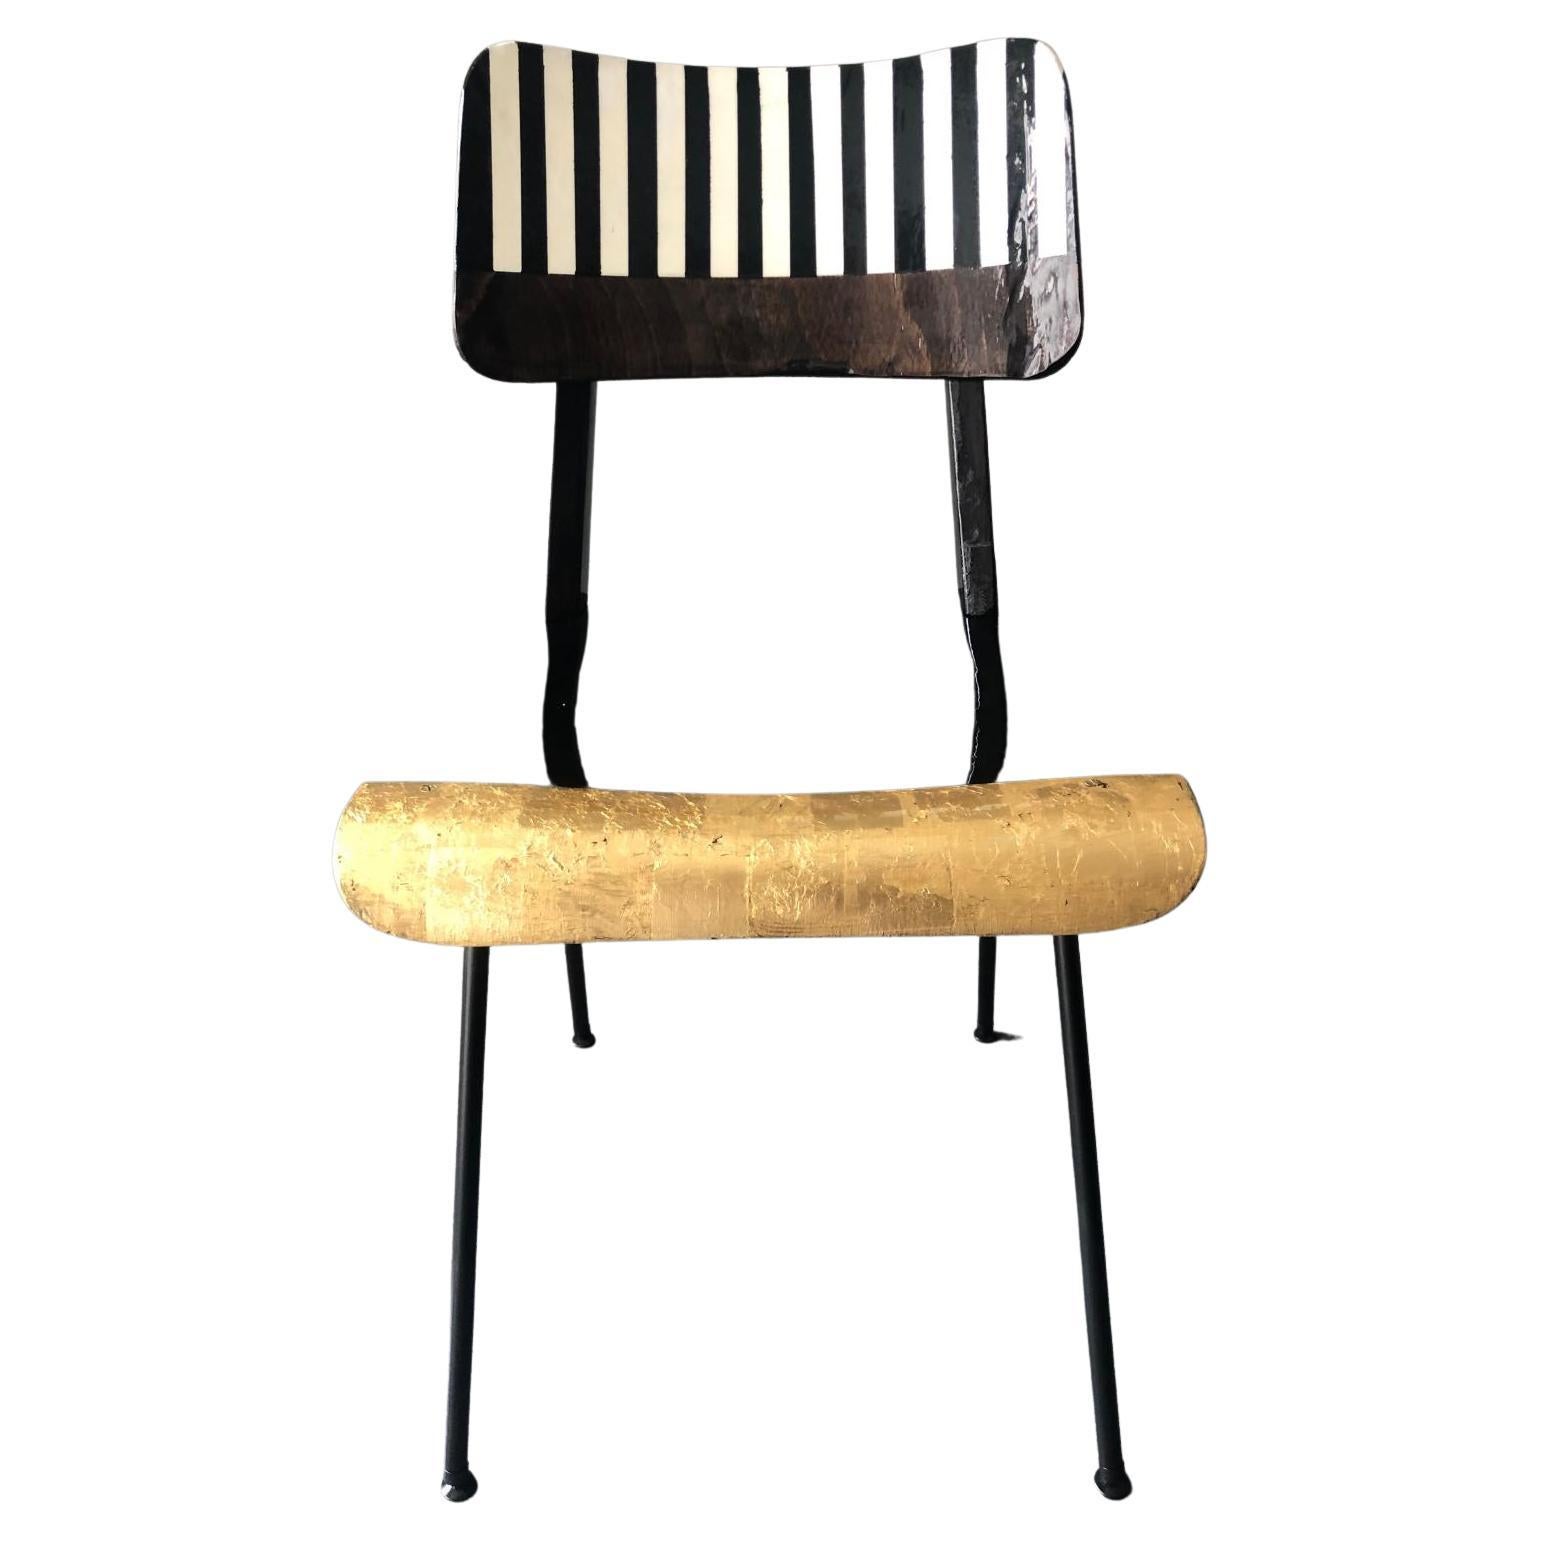 Clash of 3 different chairs from mid century modern, gold plated, painted and lacquered

I learn out of a past that has been created for me, a foundation to build on my own work
And create new pathes of art, design and everything that comes with